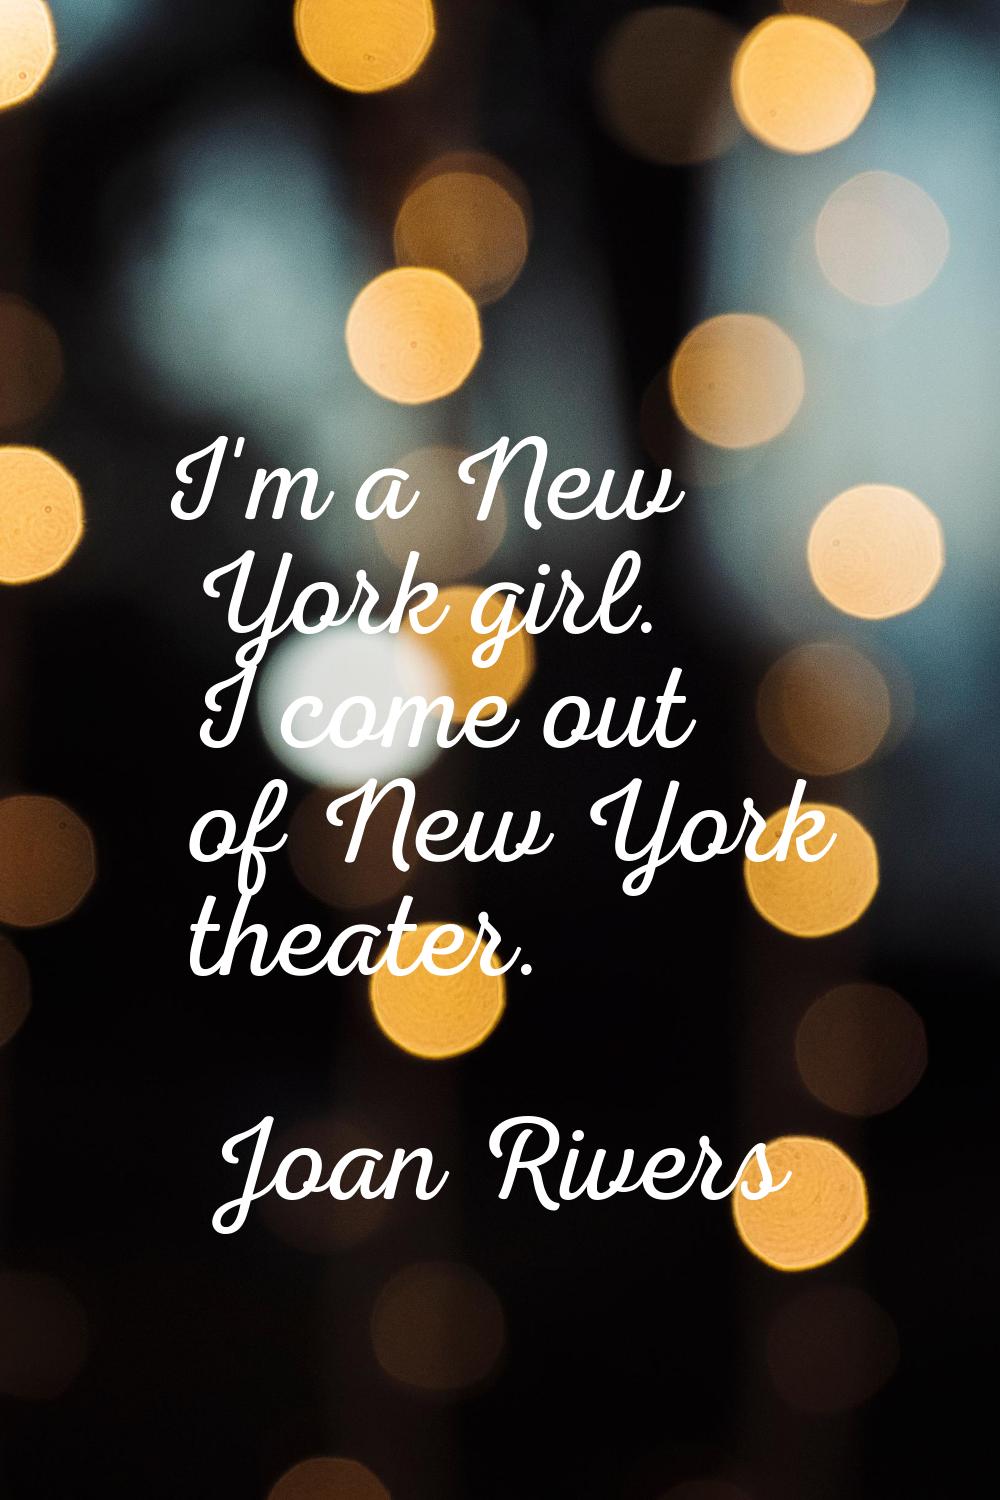 I'm a New York girl. I come out of New York theater.